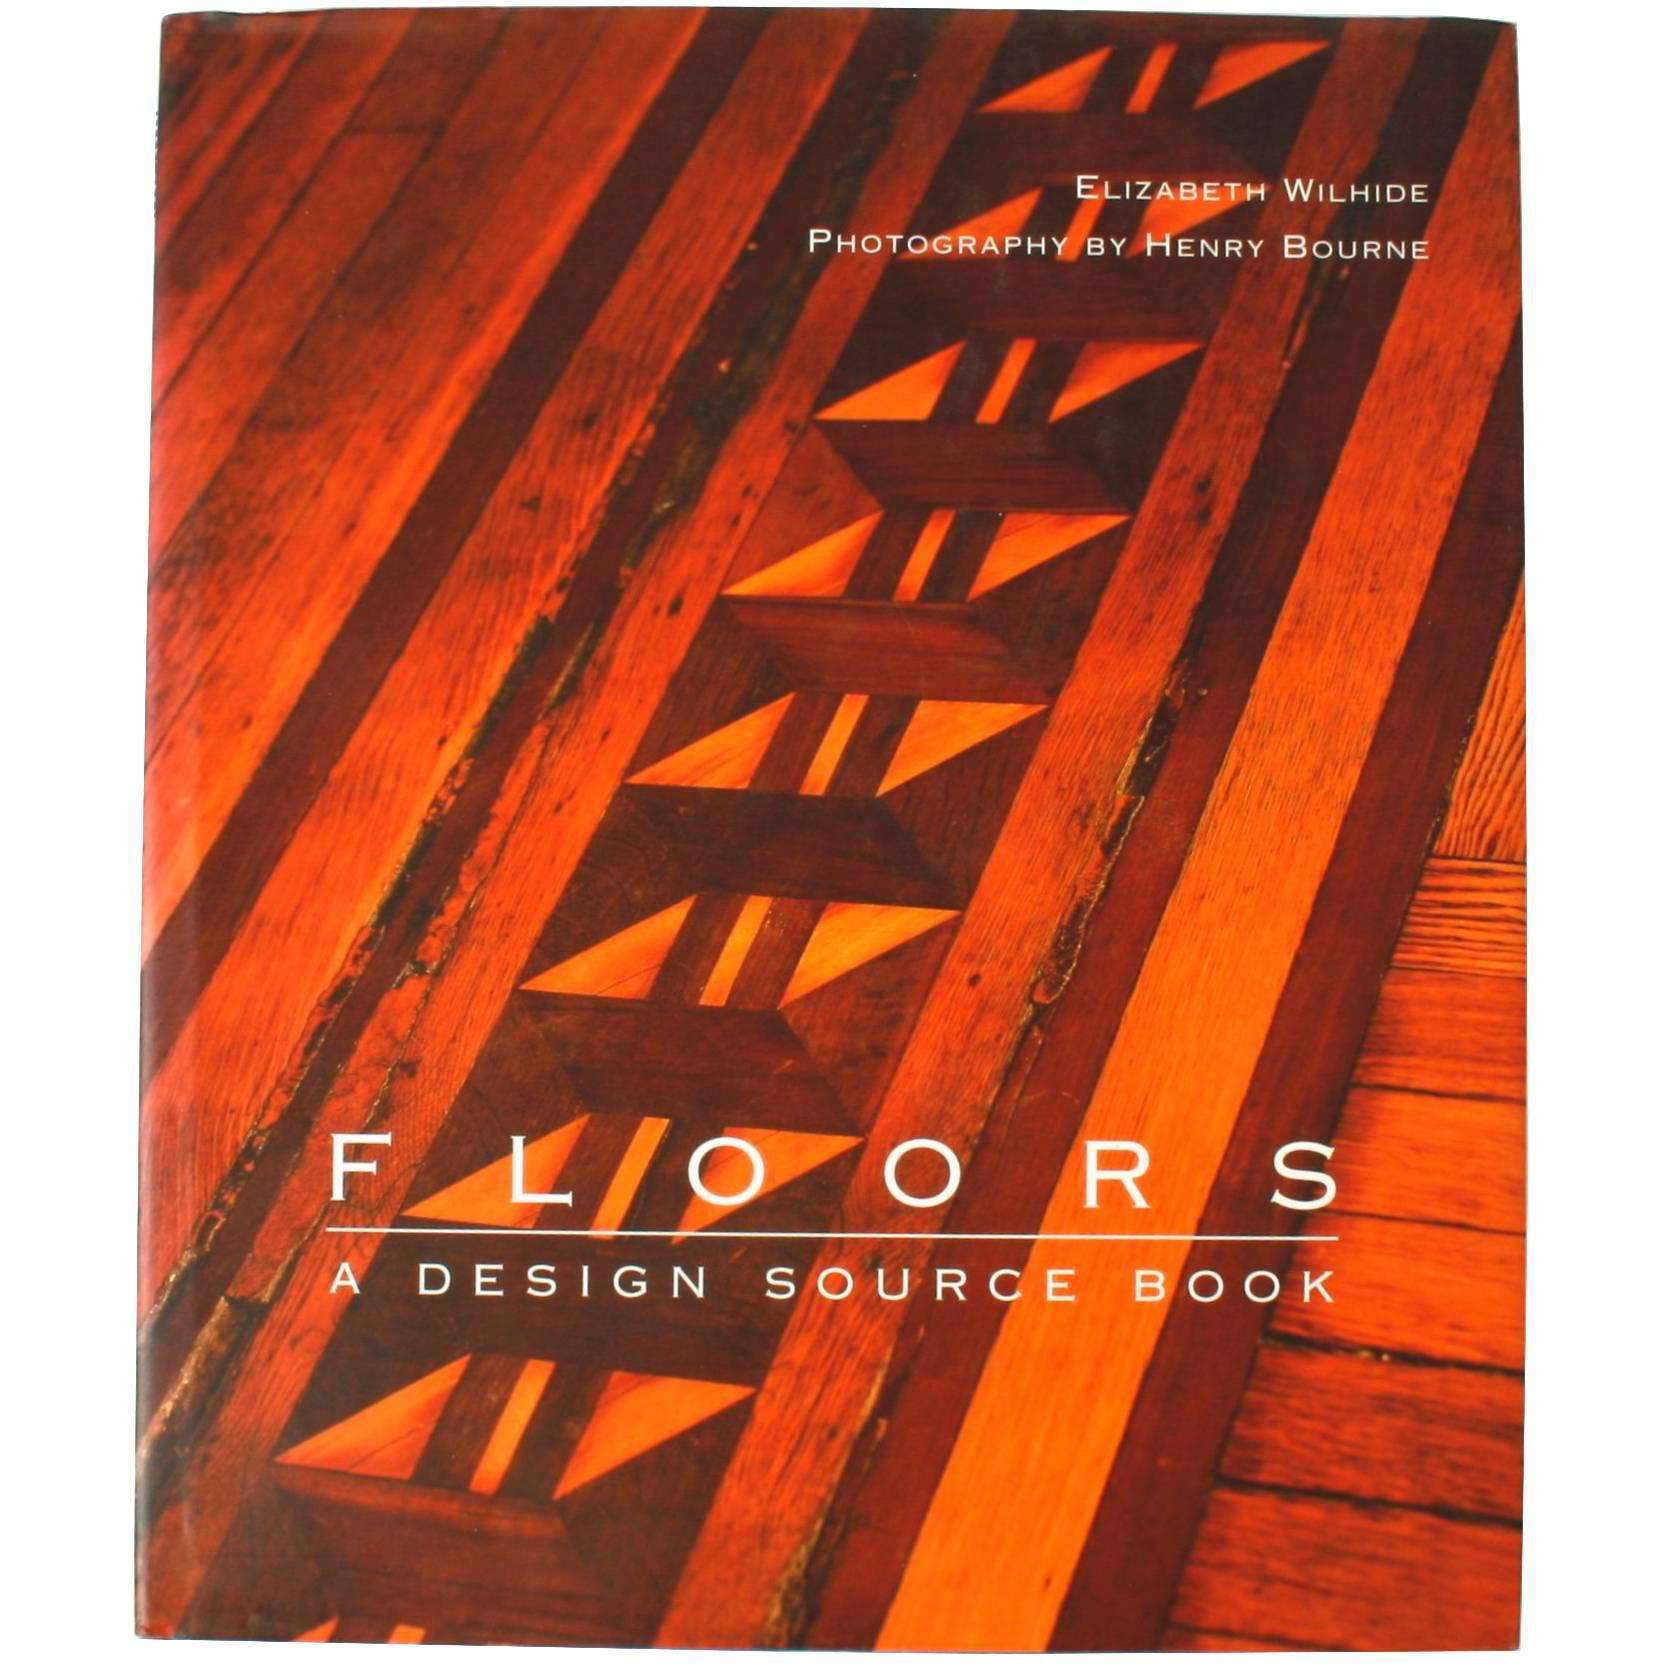 Floors, a Design Source Book by Elizabeth Wilhide, First Edition